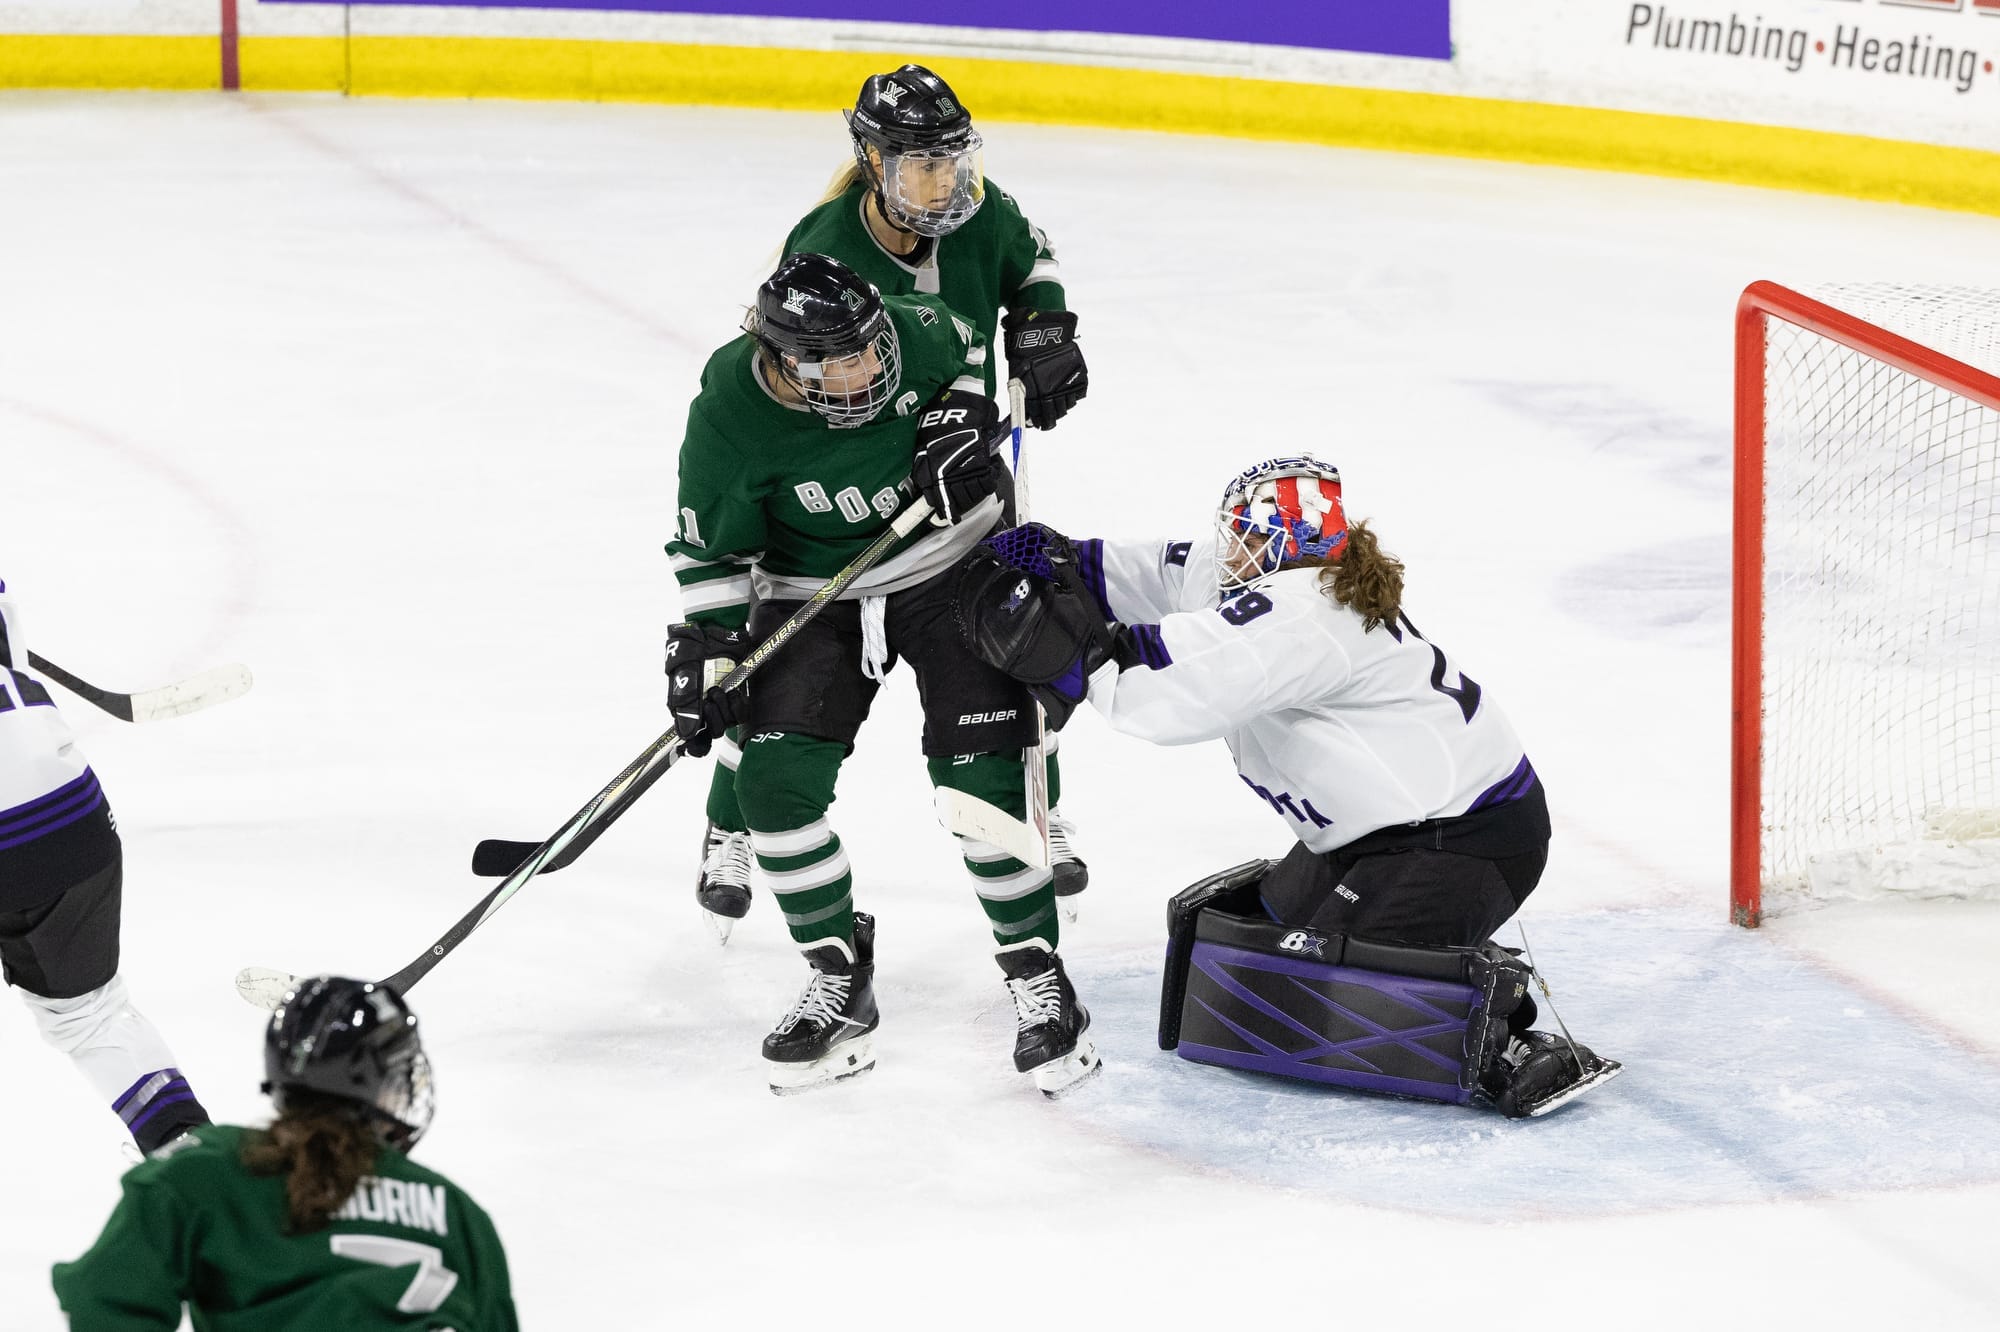 Nicole Hensley, in her white away jersey and Minnesota pads, pushes Hilary Knight, wearing her green home uniform, out of her crease.